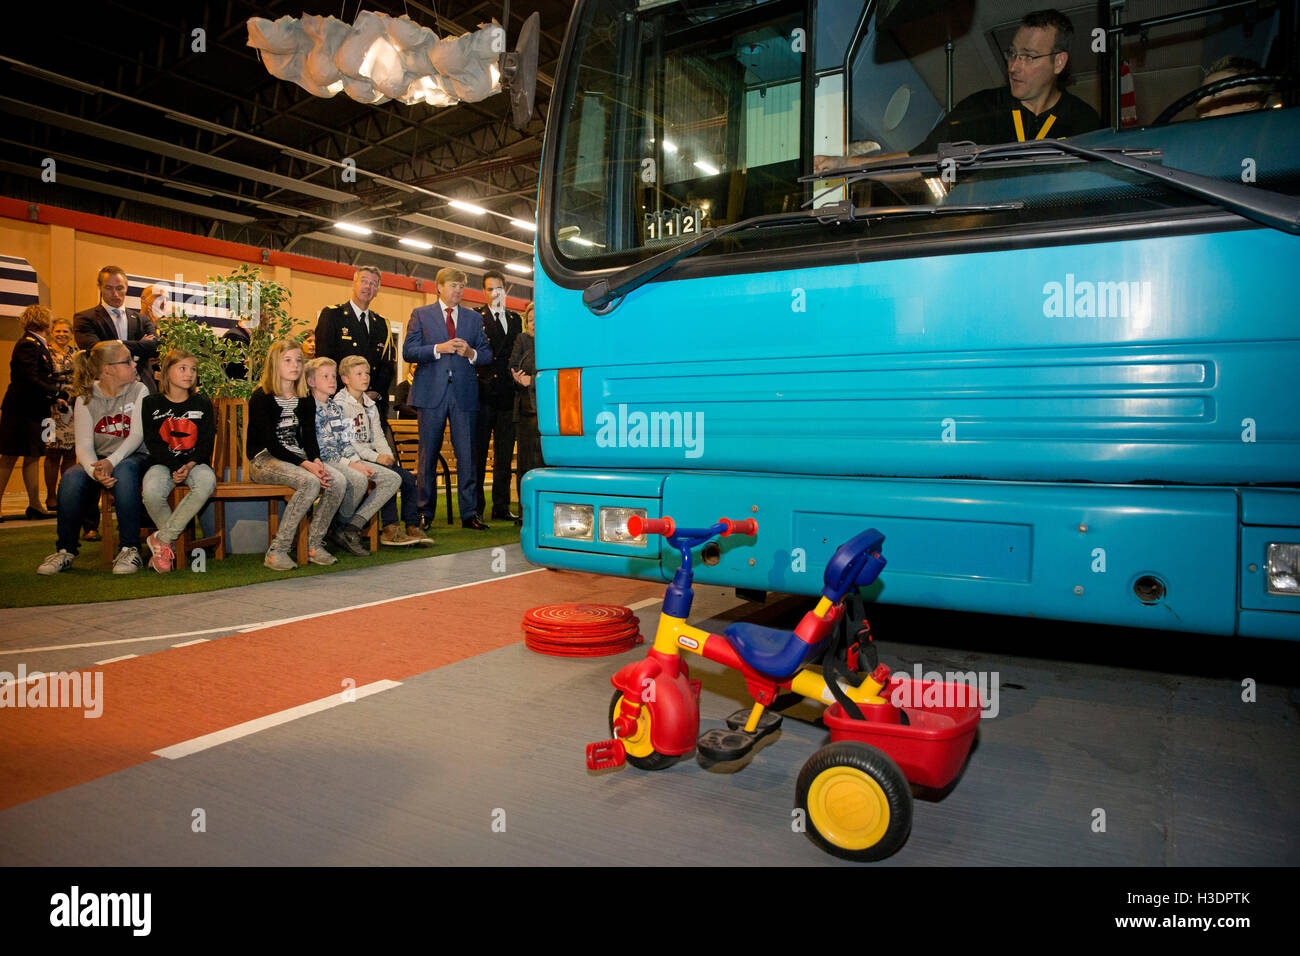 Deurningen, The Netherlands. 6th Oct, 2016. King Willem-Alexander of The Netherlands (C) visits the Twente Safety Campus in Deurningen, The Netherlands, 6 October 2016. At the campus school children and the elderly how to react in dangerous situations. Photo: Patrick van Katwijk//POINT DE VUE OUT/dpa/Alamy Live News Stock Photo